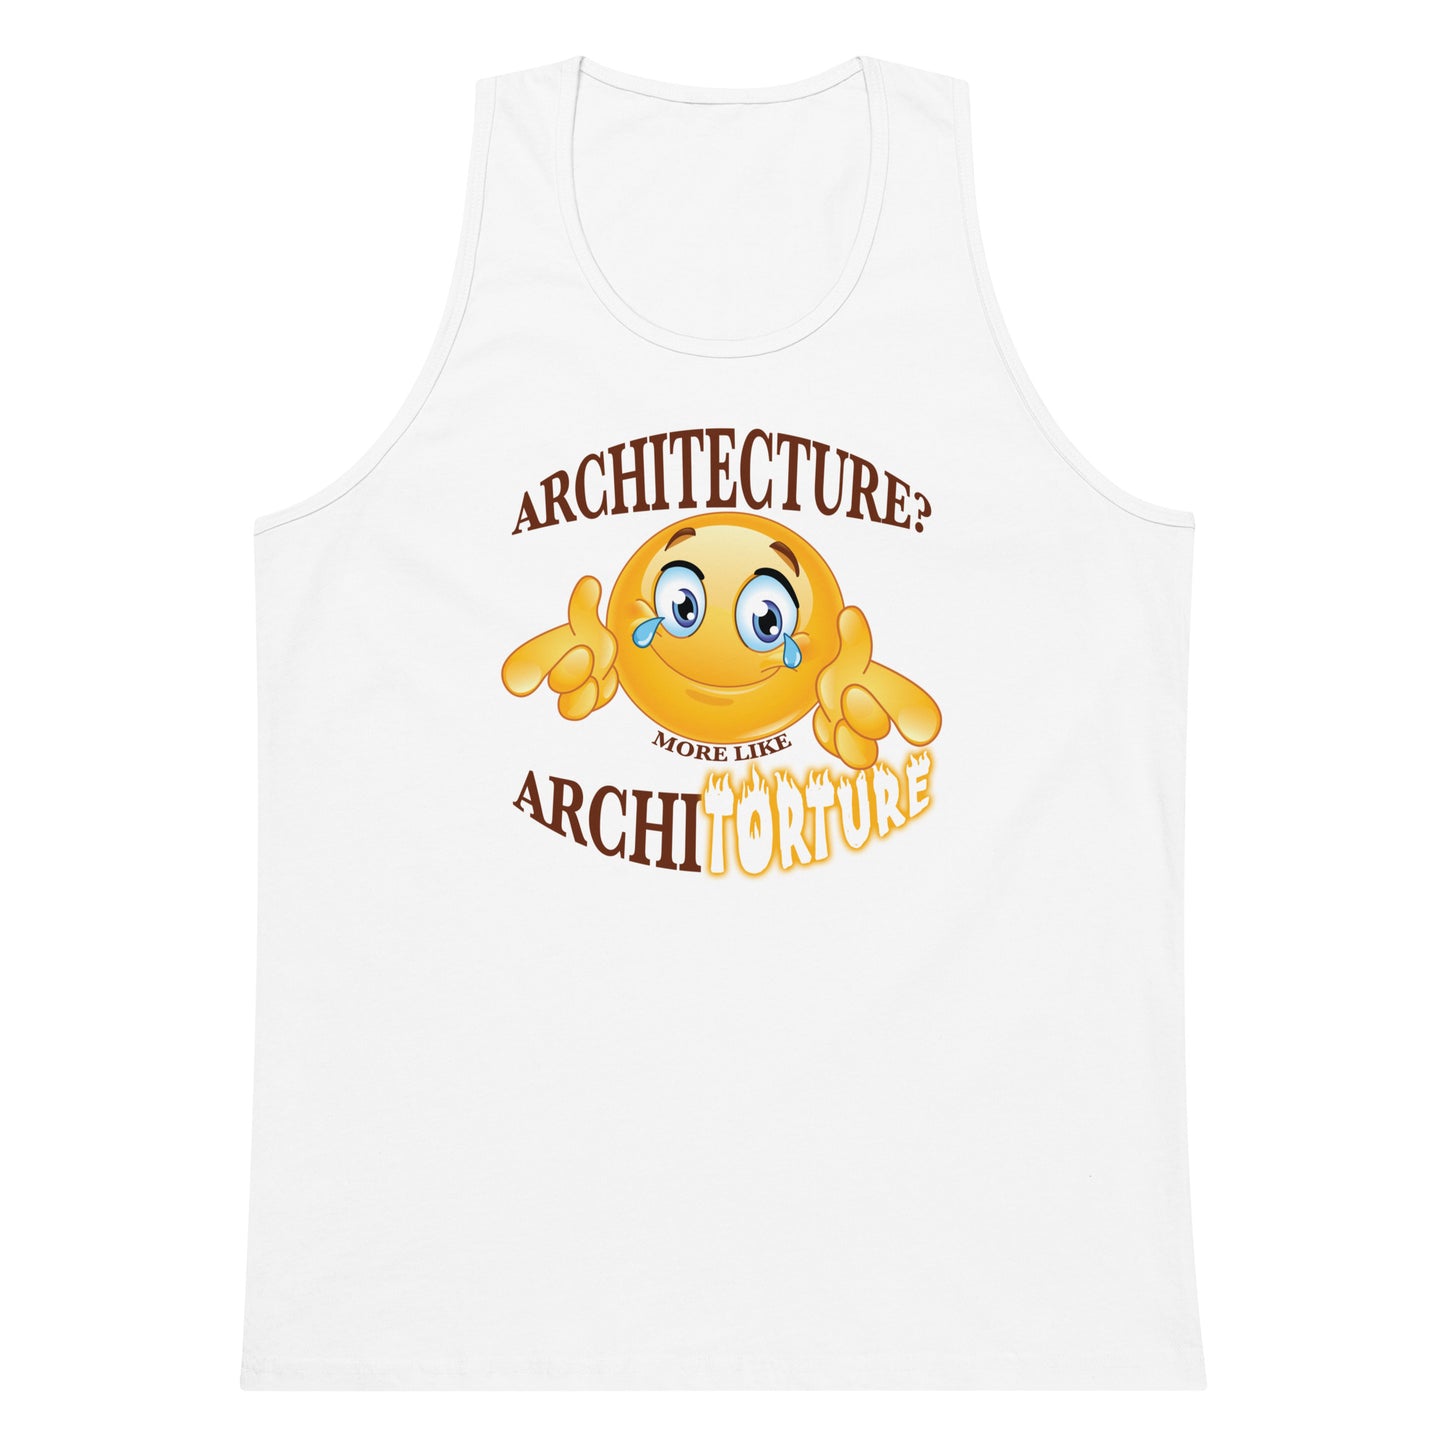 Architecture (Architorture) tank top